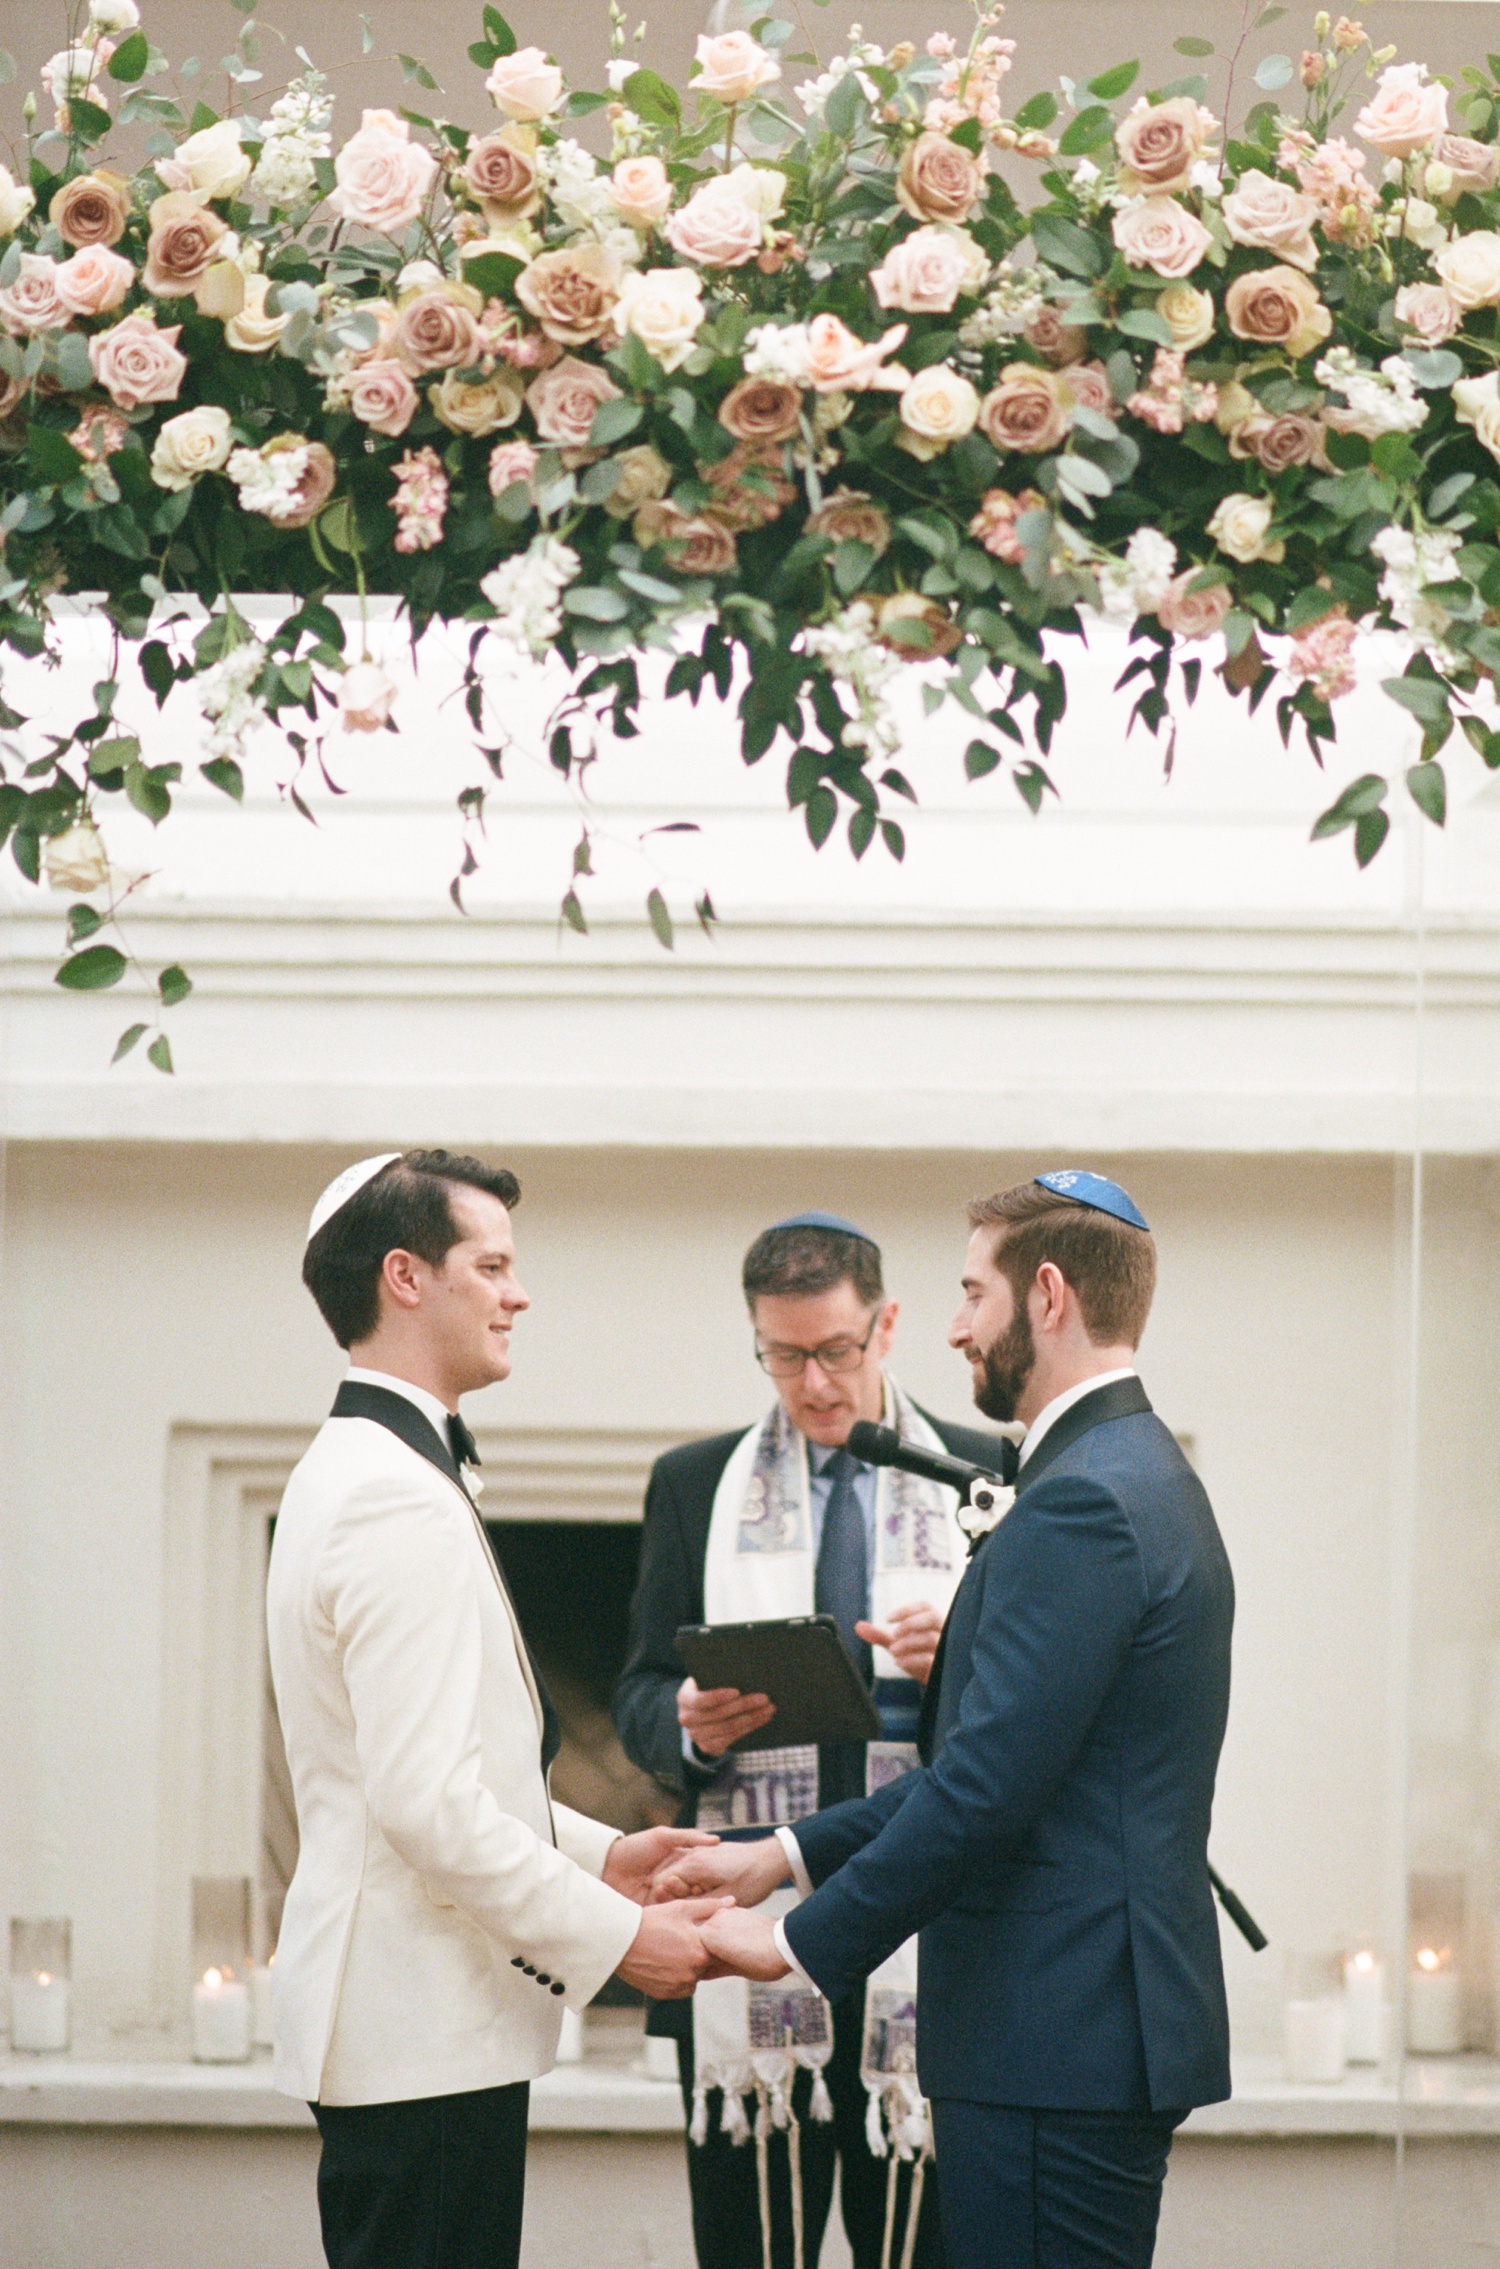 Two grooms hold hands under a floral chuppah at an outdoor wedding photographed by a Philadelphia photographer.